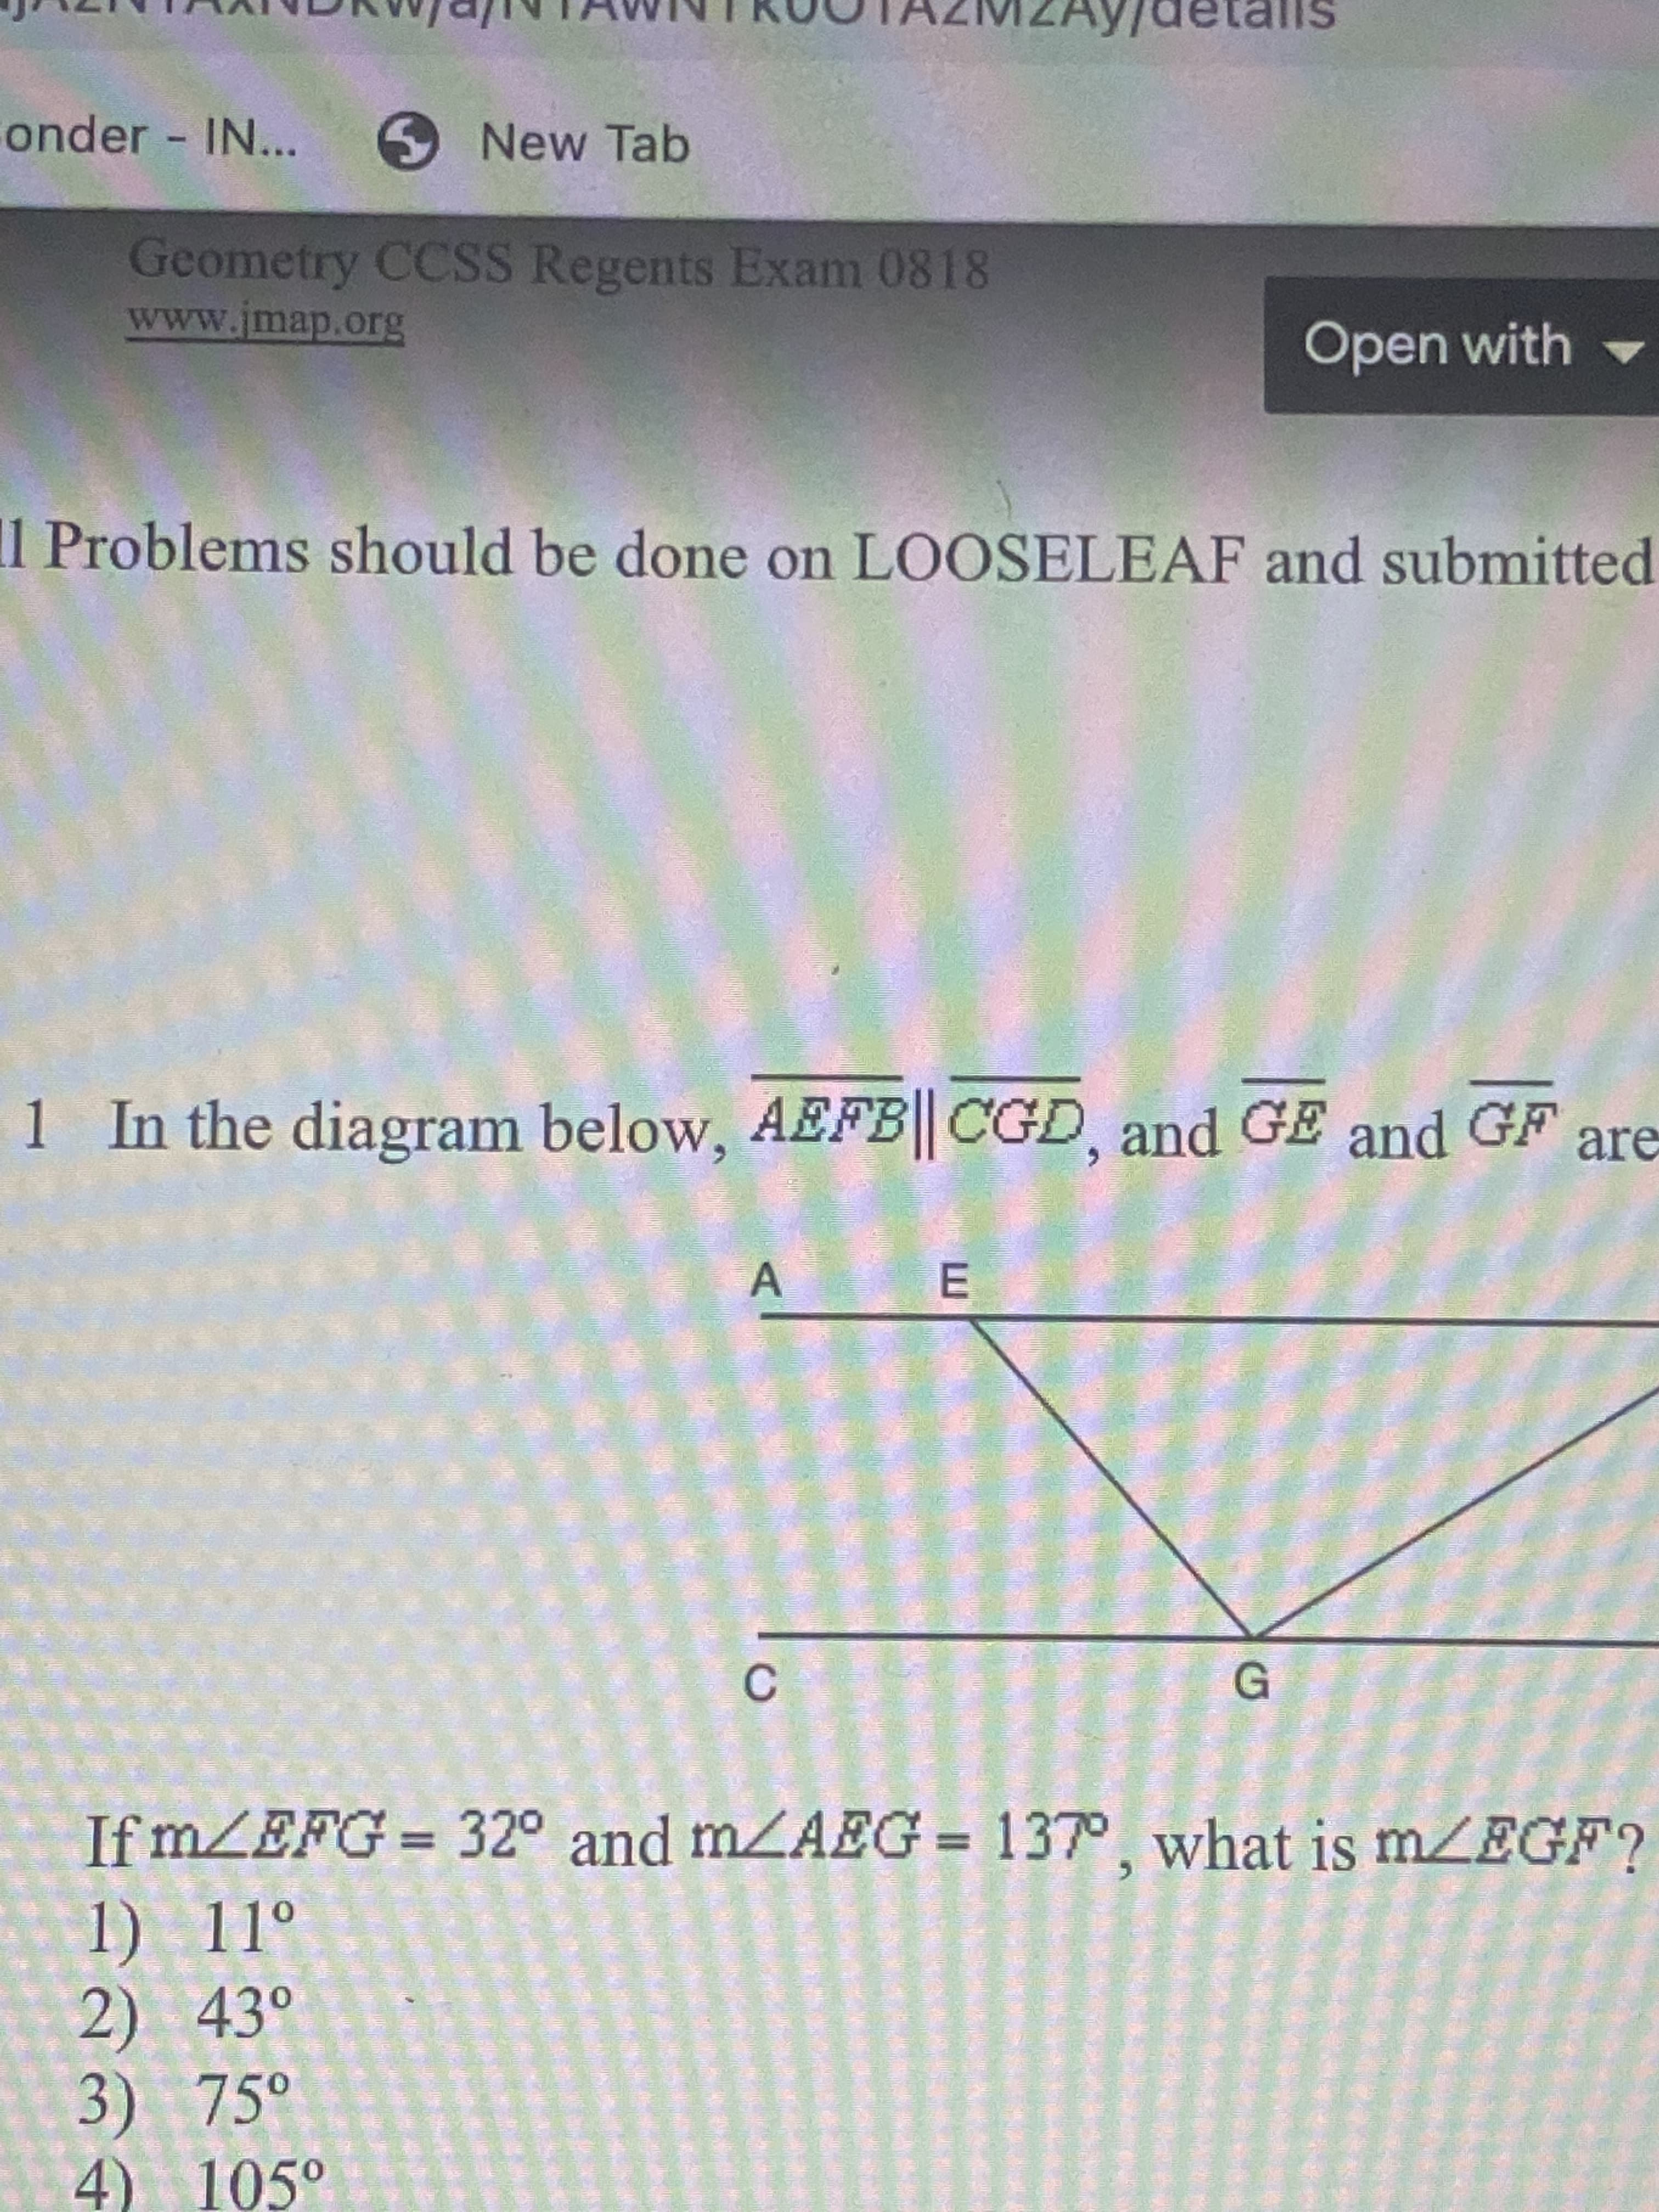 detalls
onder IN...
New Tab
Geometry CCSS Regents Exam 0818
www.jmap.org
Open with
Problems should be done on LOOSELEAF and submitted
1 In the diagram below, AEFB|| CGD, and GE and GF are
C.
If mZEFG 32° and mZAEG = 137°, what is mZEGF?
1) 11°
2) 43°
3) 75°
4) 105°
